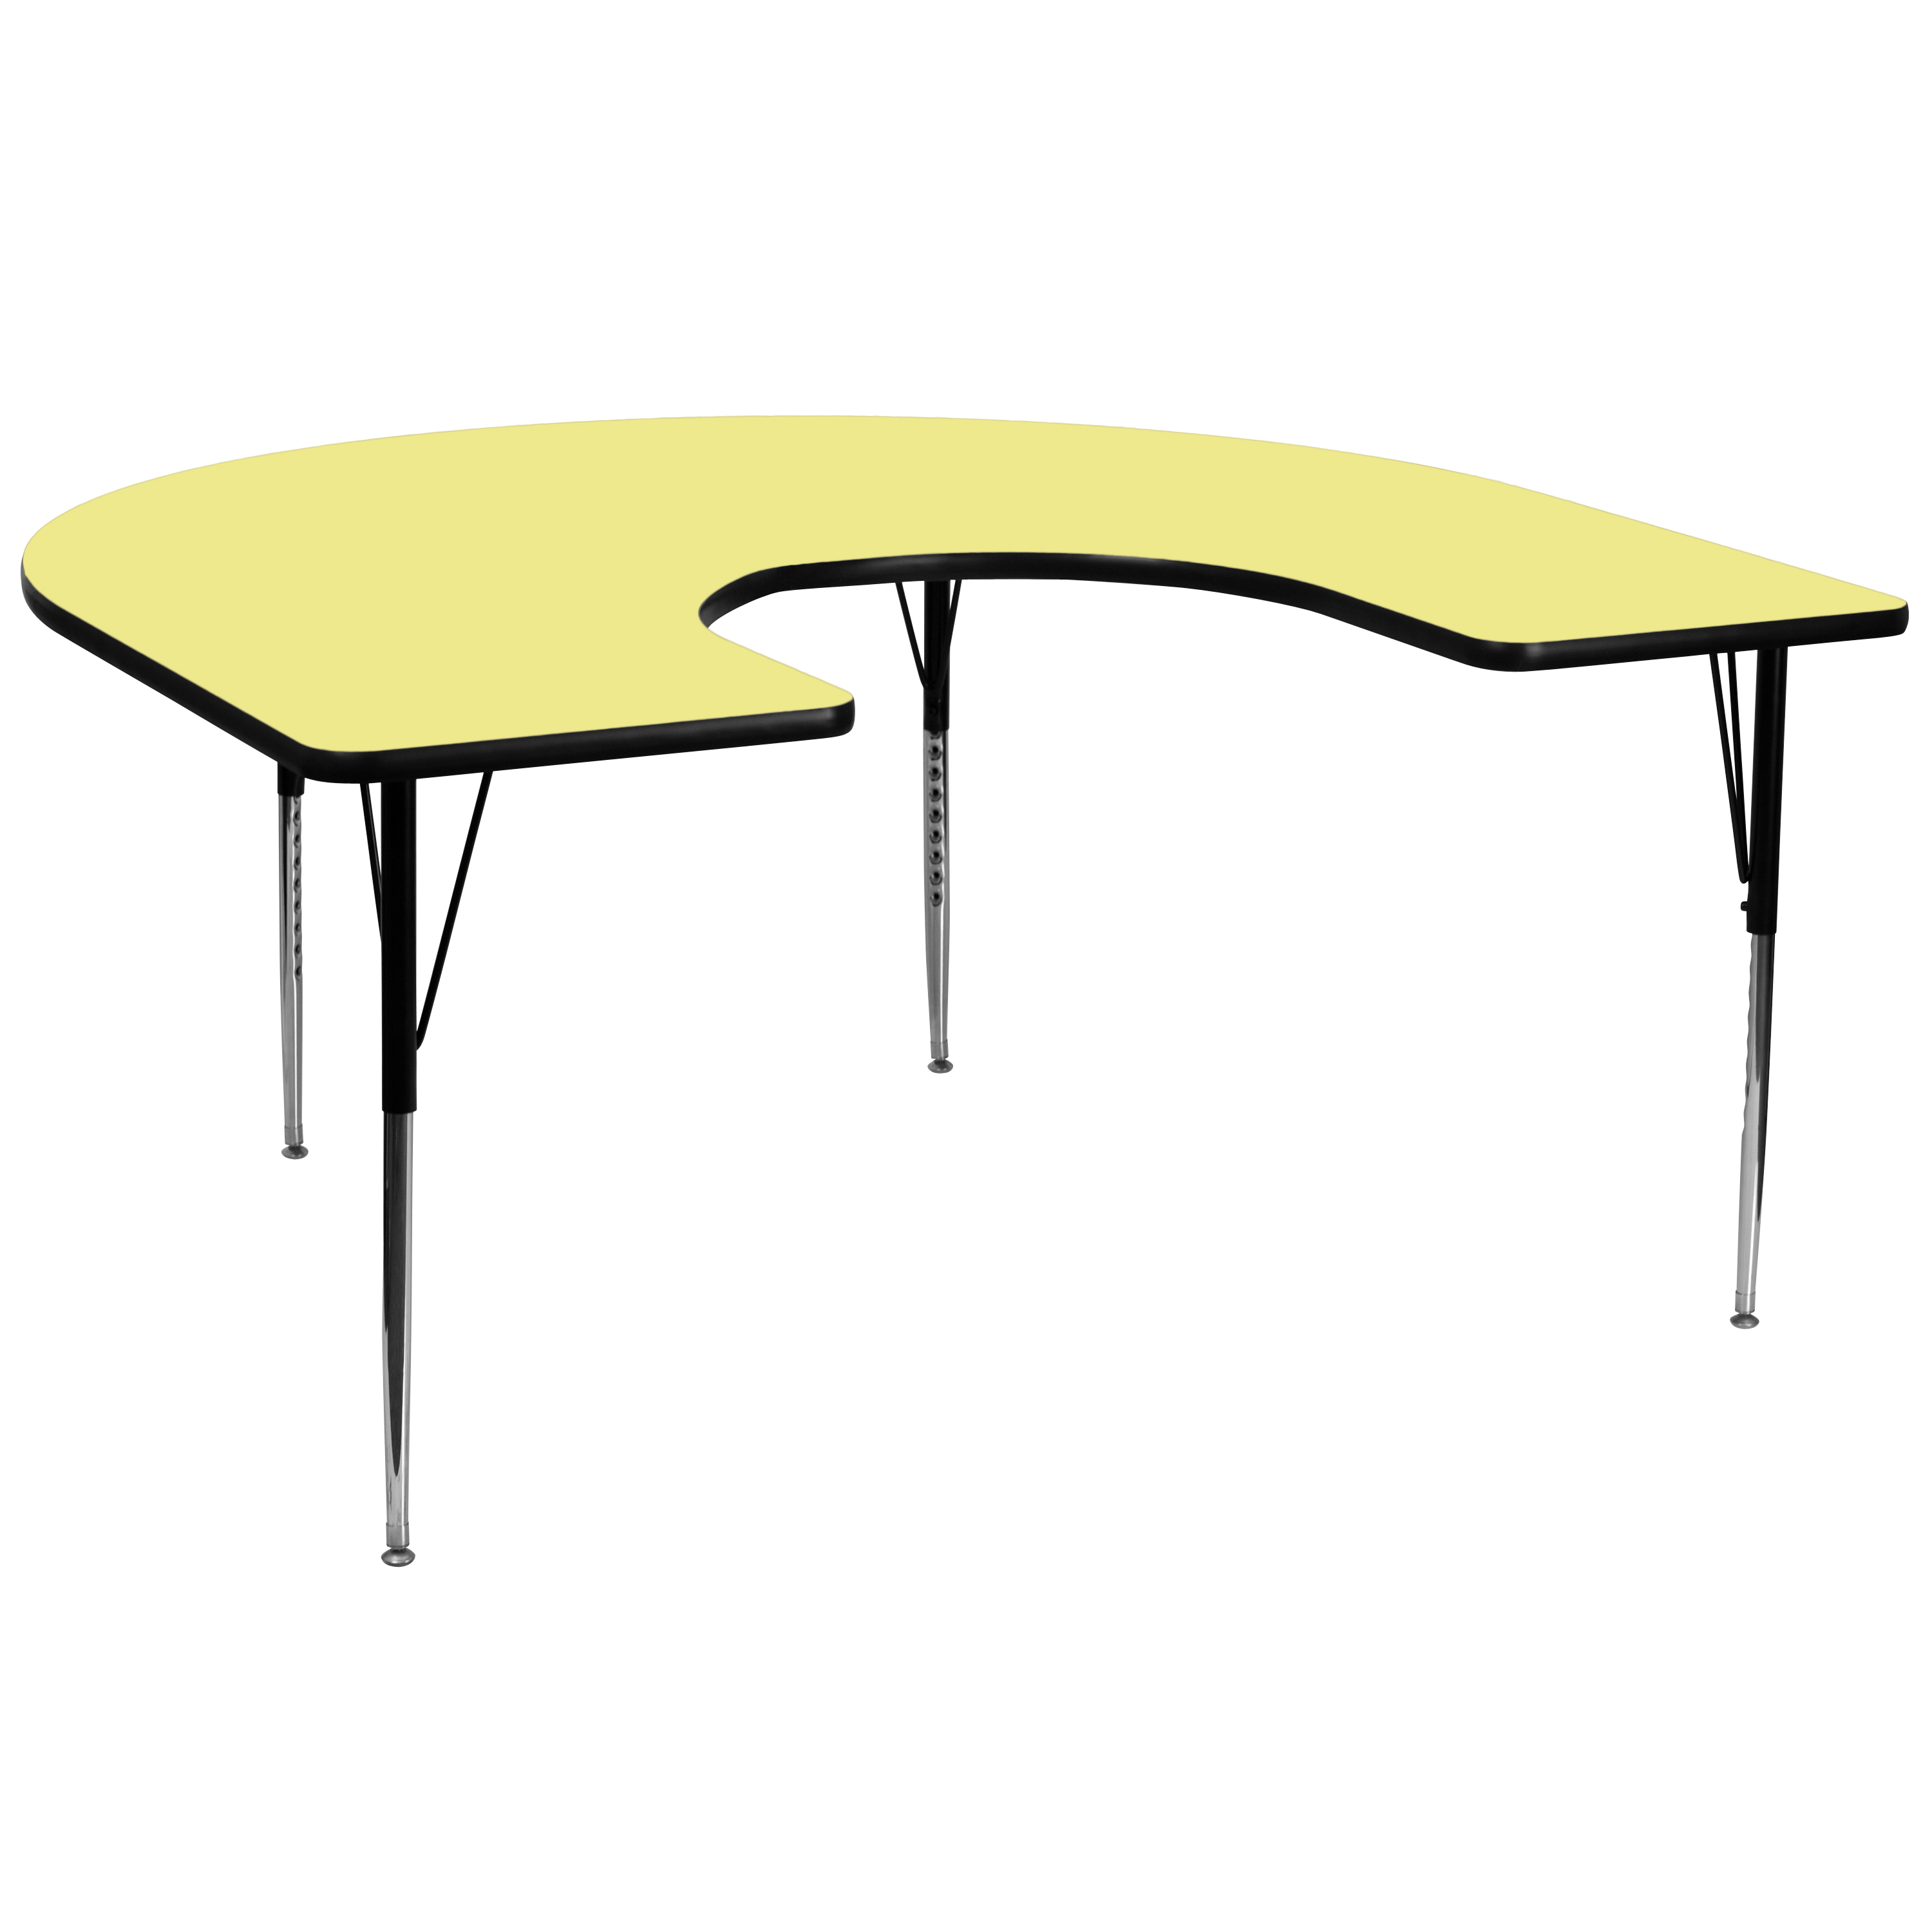 Flash Furniture Wren 60''W x 66''L Horseshoe Yellow Thermal Laminate Activity Table - Standard Height Adjustable Legs - image 1 of 3